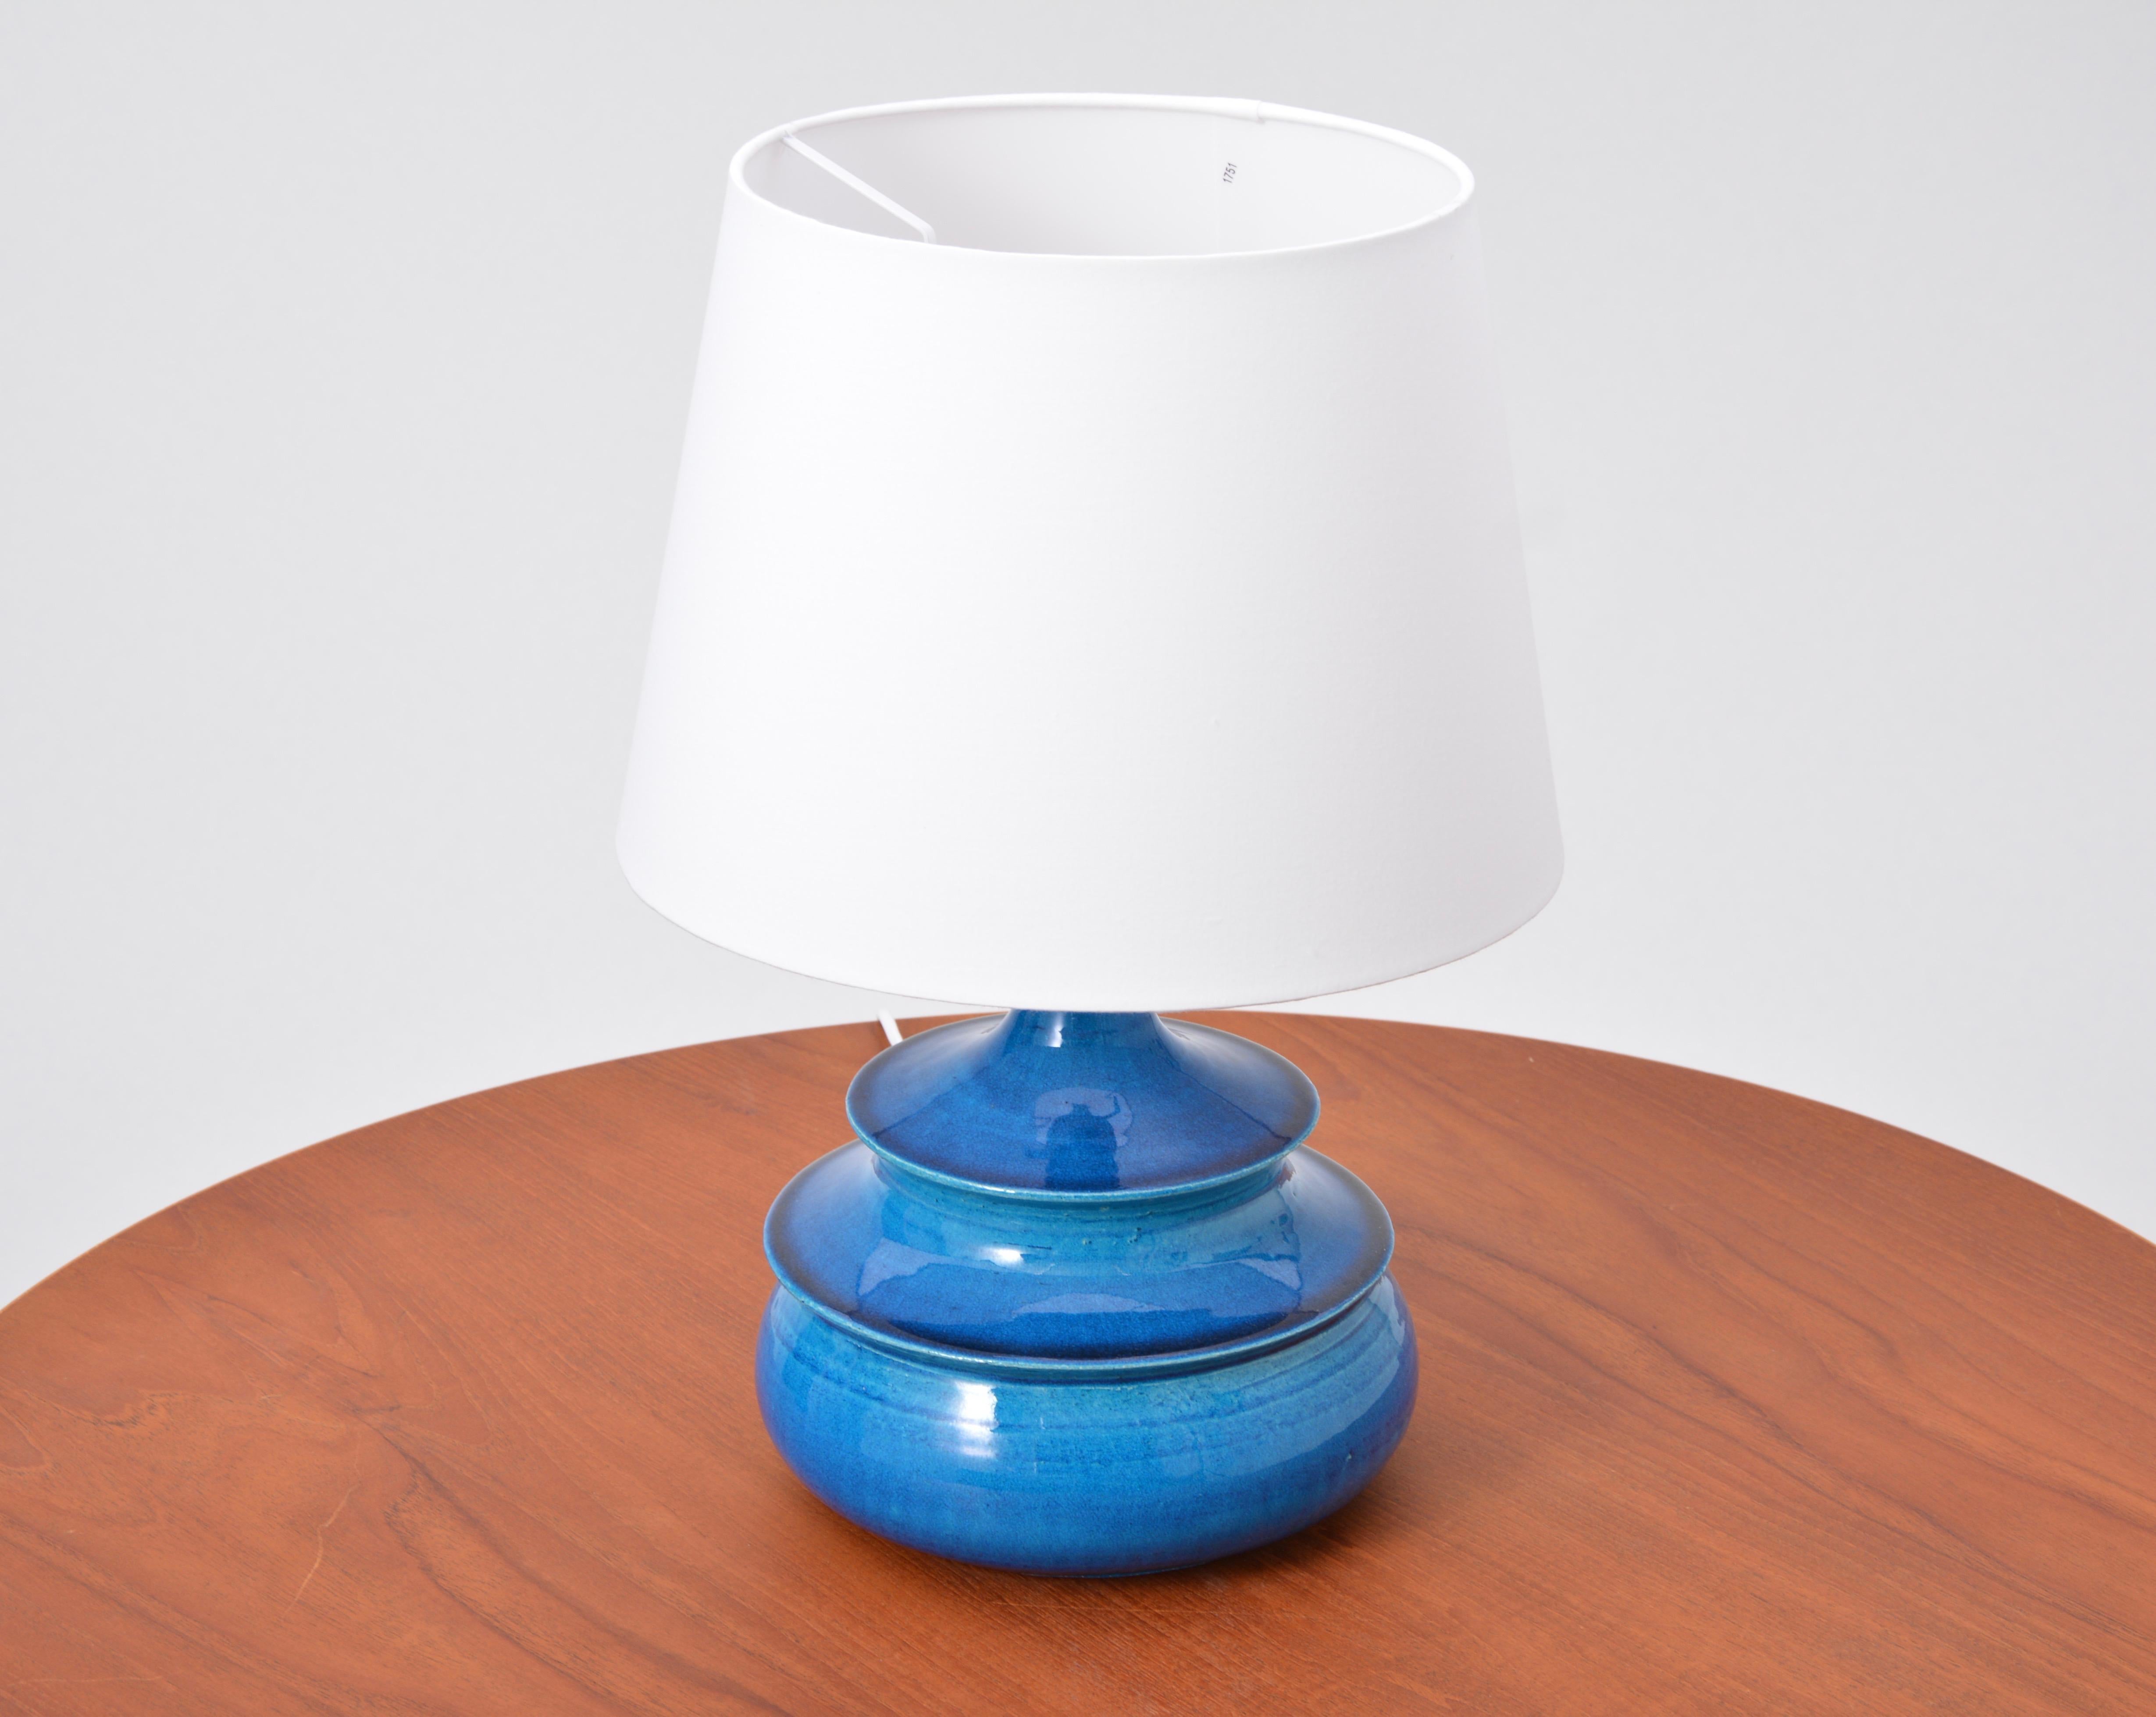 Turquoise Danish Mid-Century Modern table lamp by Nils Kähler

This circular table lamp was designed by Nils Kähler in the 1960s in Denmark and produced by the company HA Kähler. It is made from glazed ceramic in a beautiful turquoise. Excellent